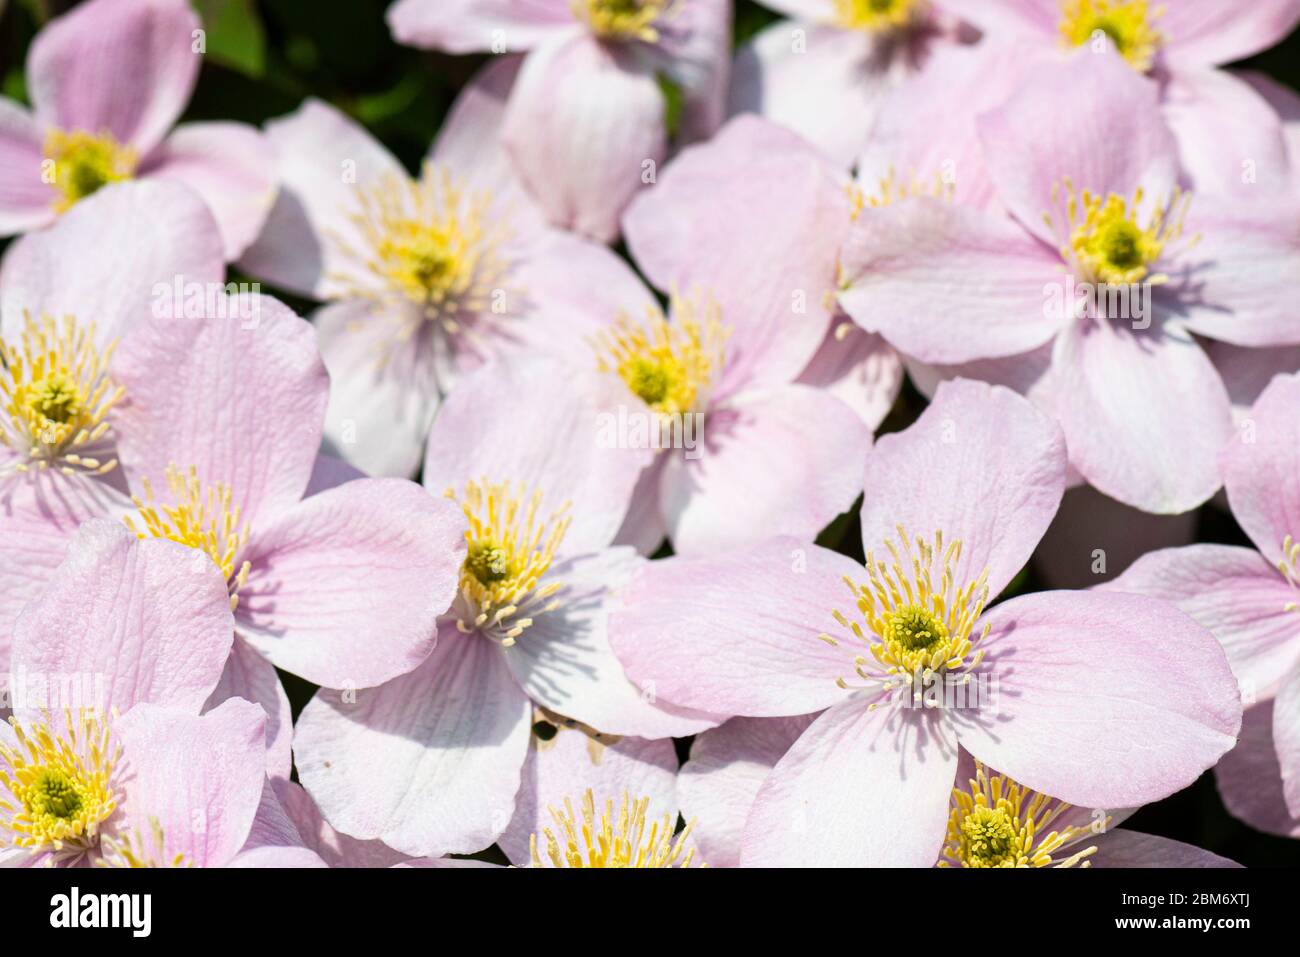 The flowers of a Clematis 'Elizabeth' Stock Photo